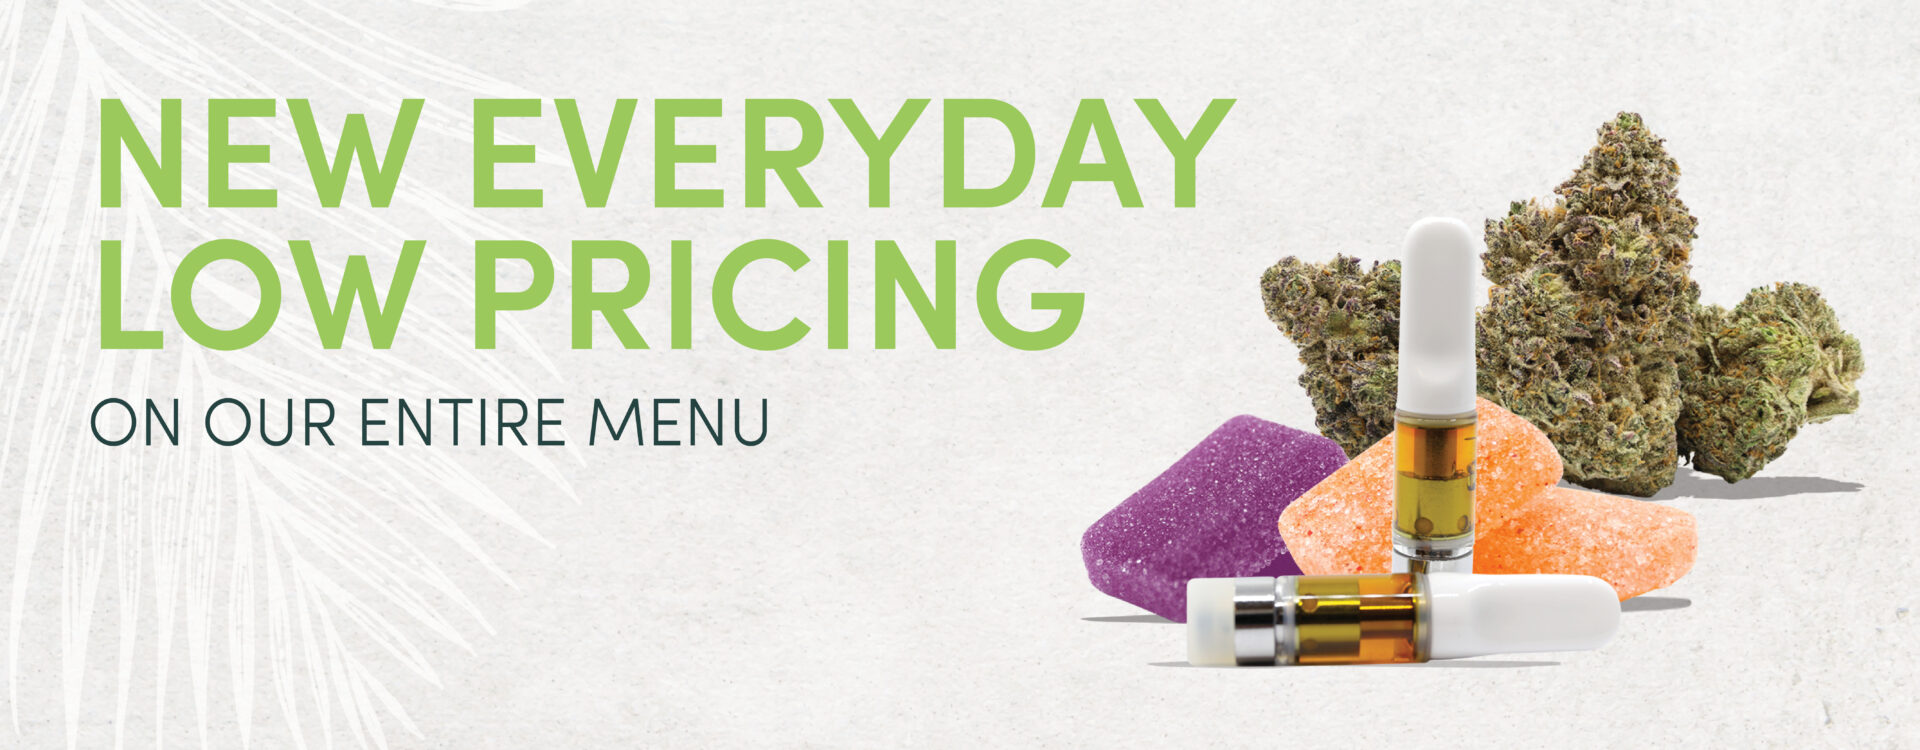 New everyday low pricing on our entire menu.